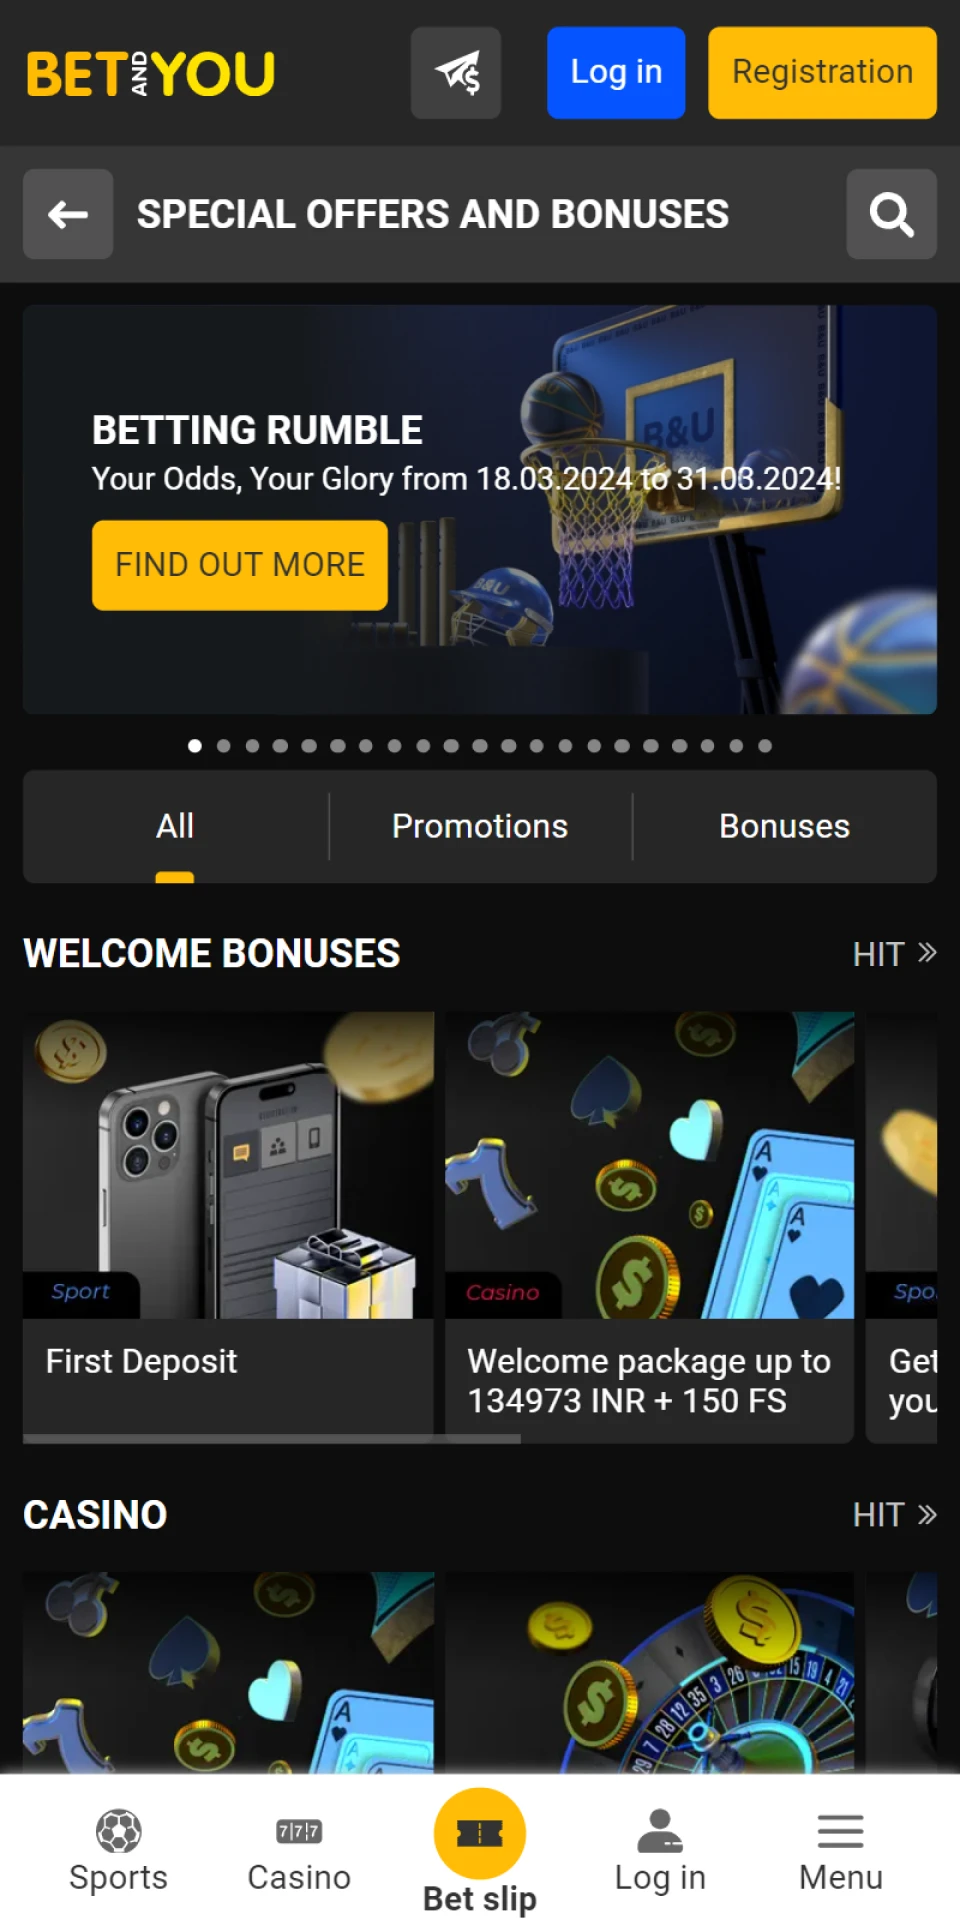 The Betandyou app offers many bonuses to its users.